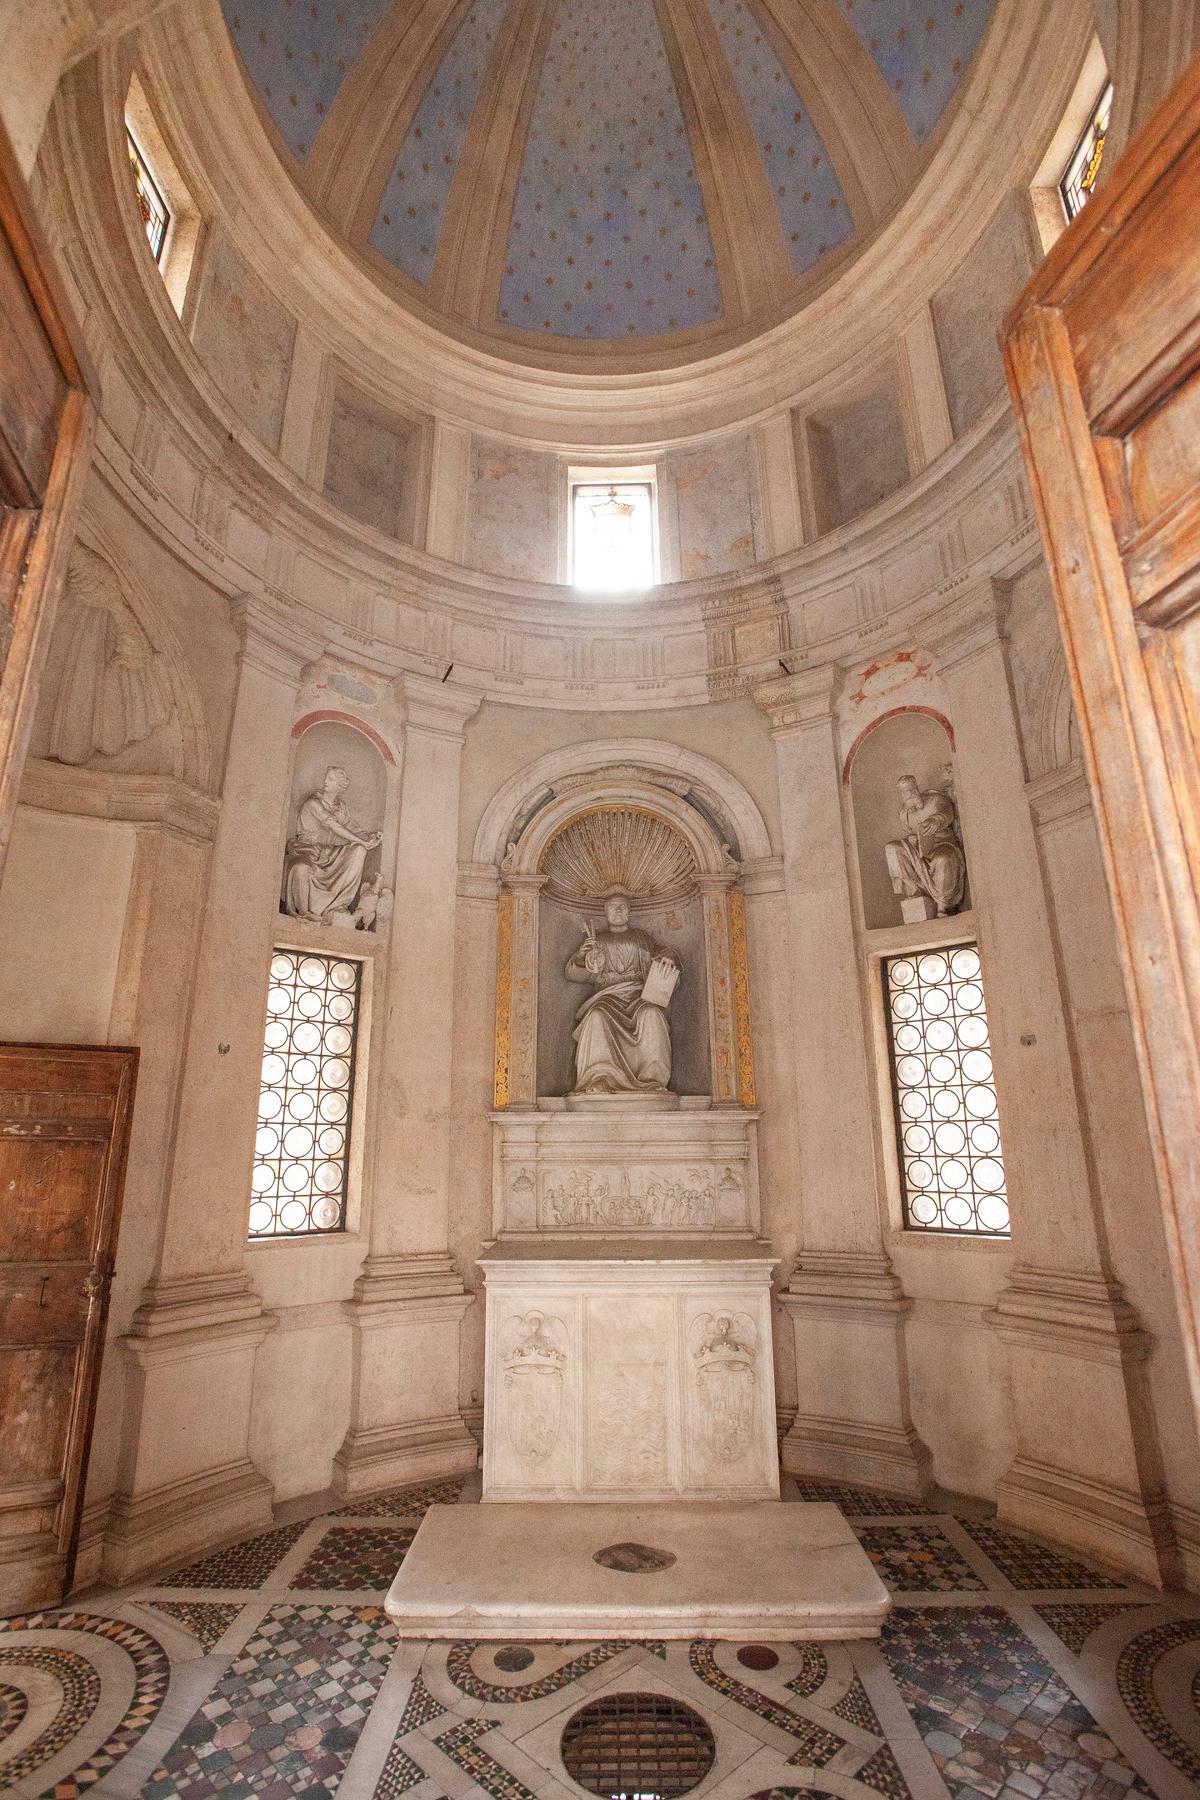 Inside, the statue of St. Peter is centrally positioned. The circle in the center of the room is meant to mark the exact spot of St. Peter's martyrdom. (JHSmith/The Epoch Times)